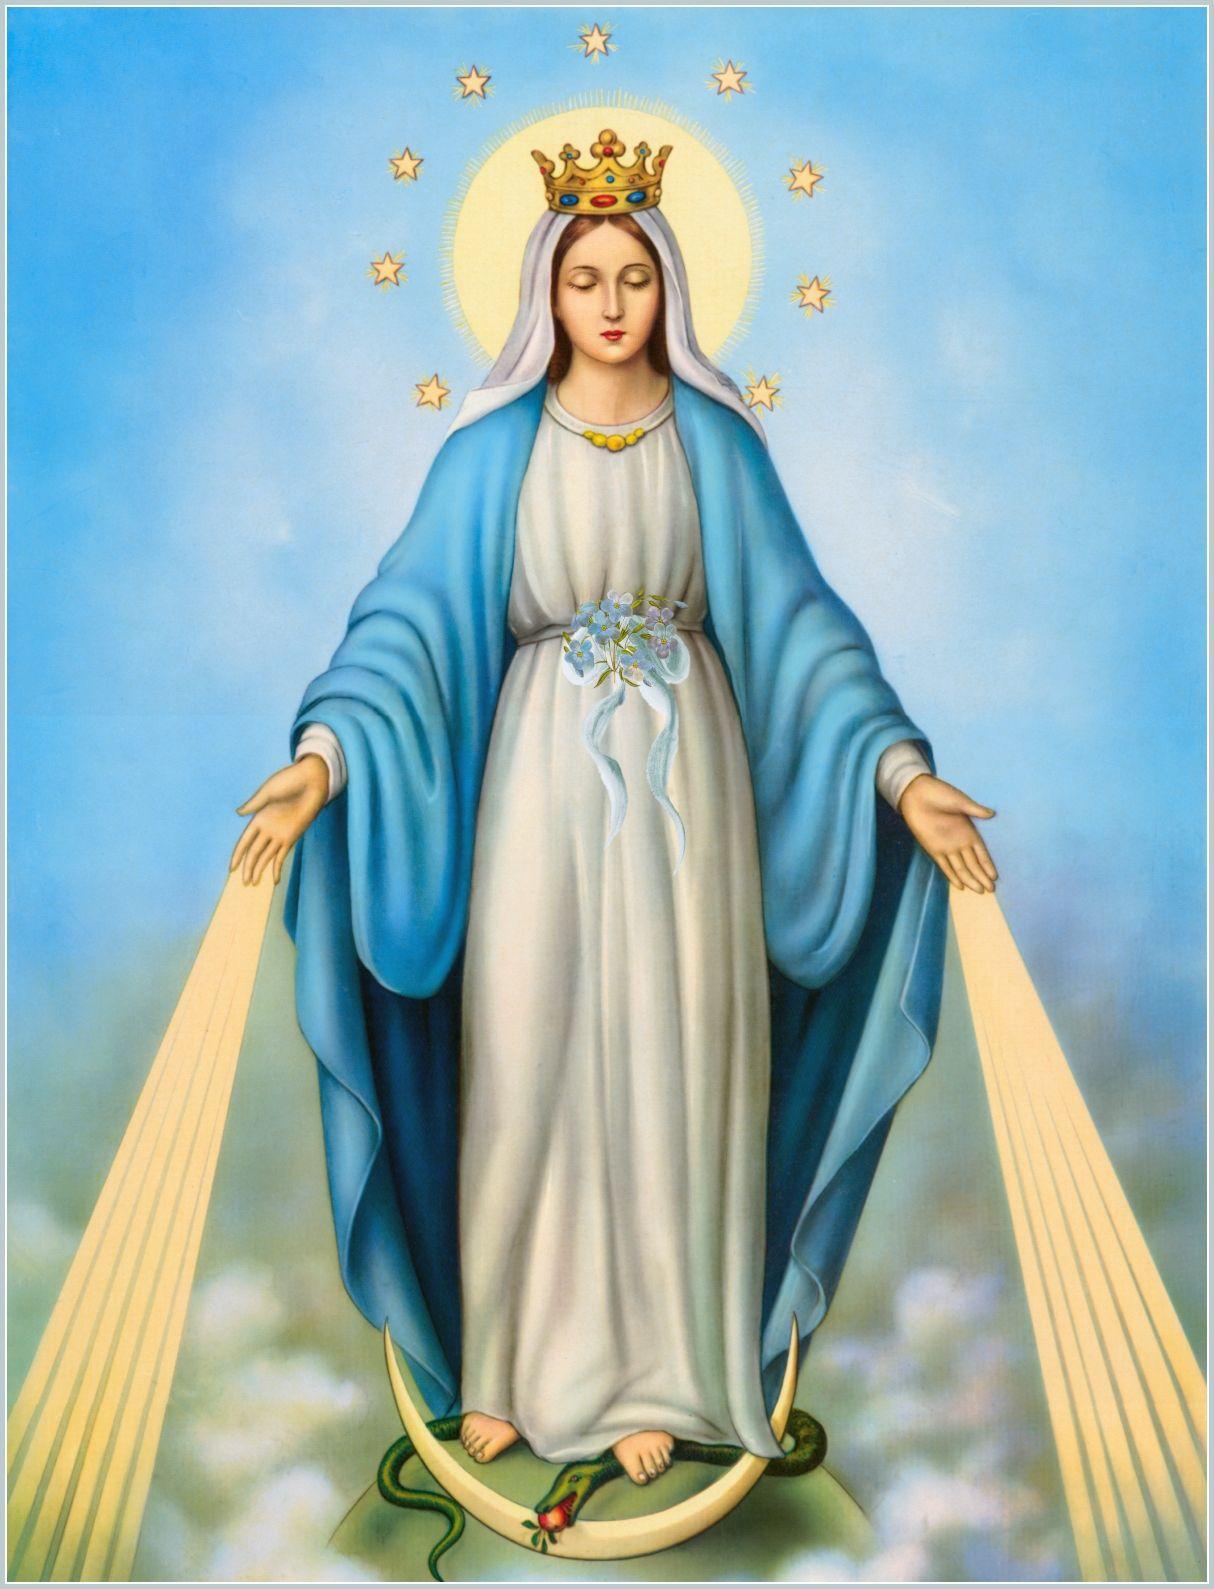 Pope's prayer to Mary, the Immaculate Conception